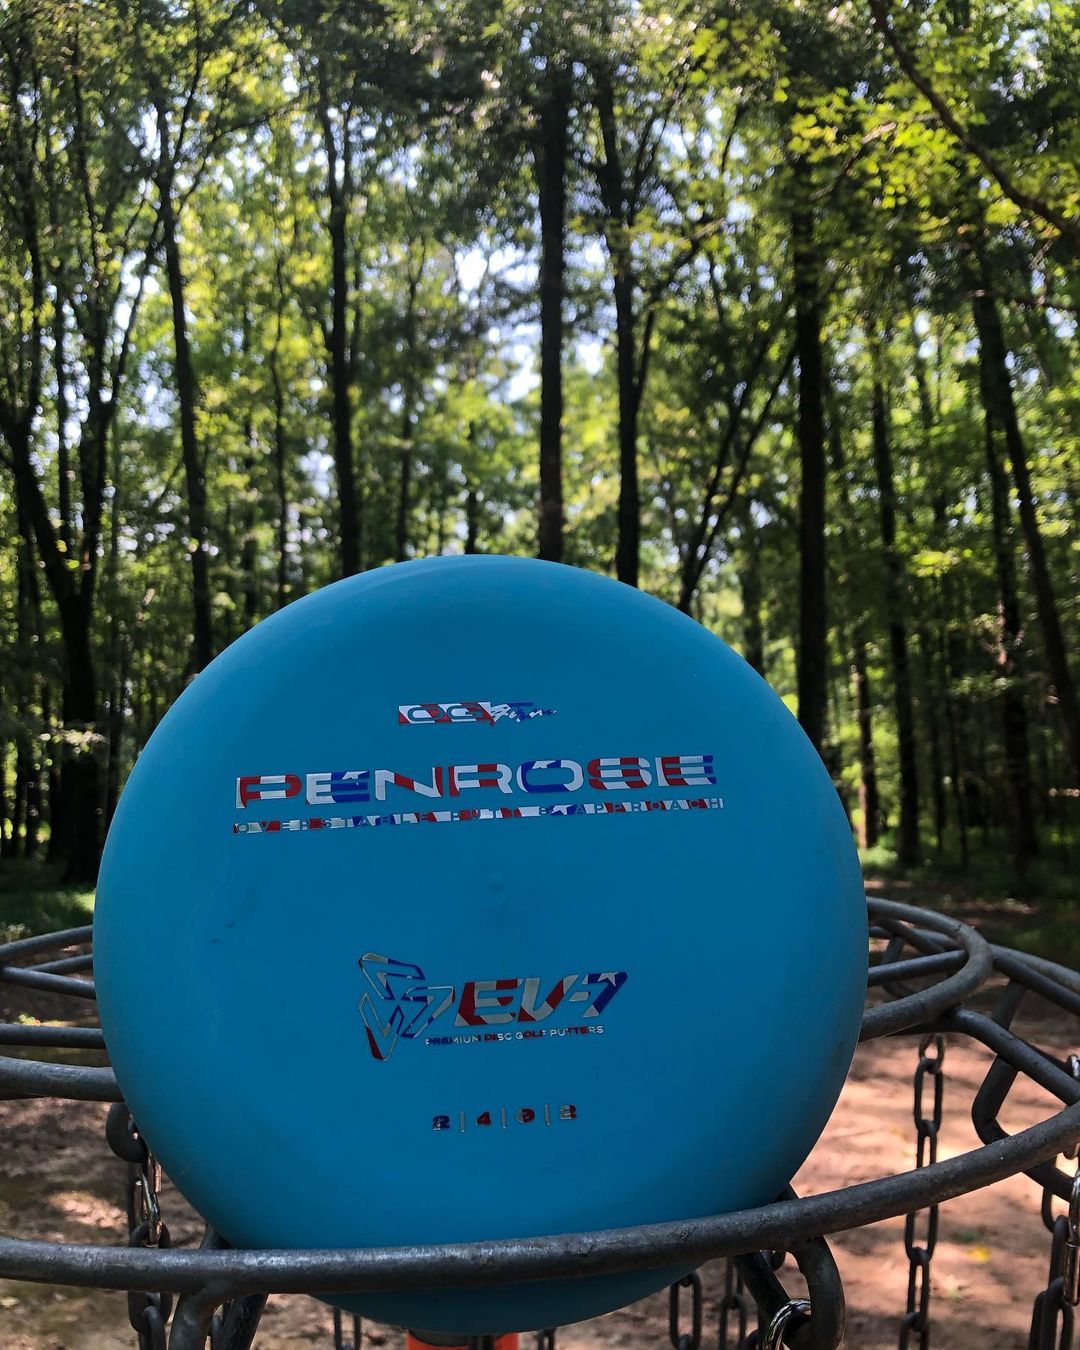 A blue frisbee is sitting in a basket while playing Disc Golf in Memphis.